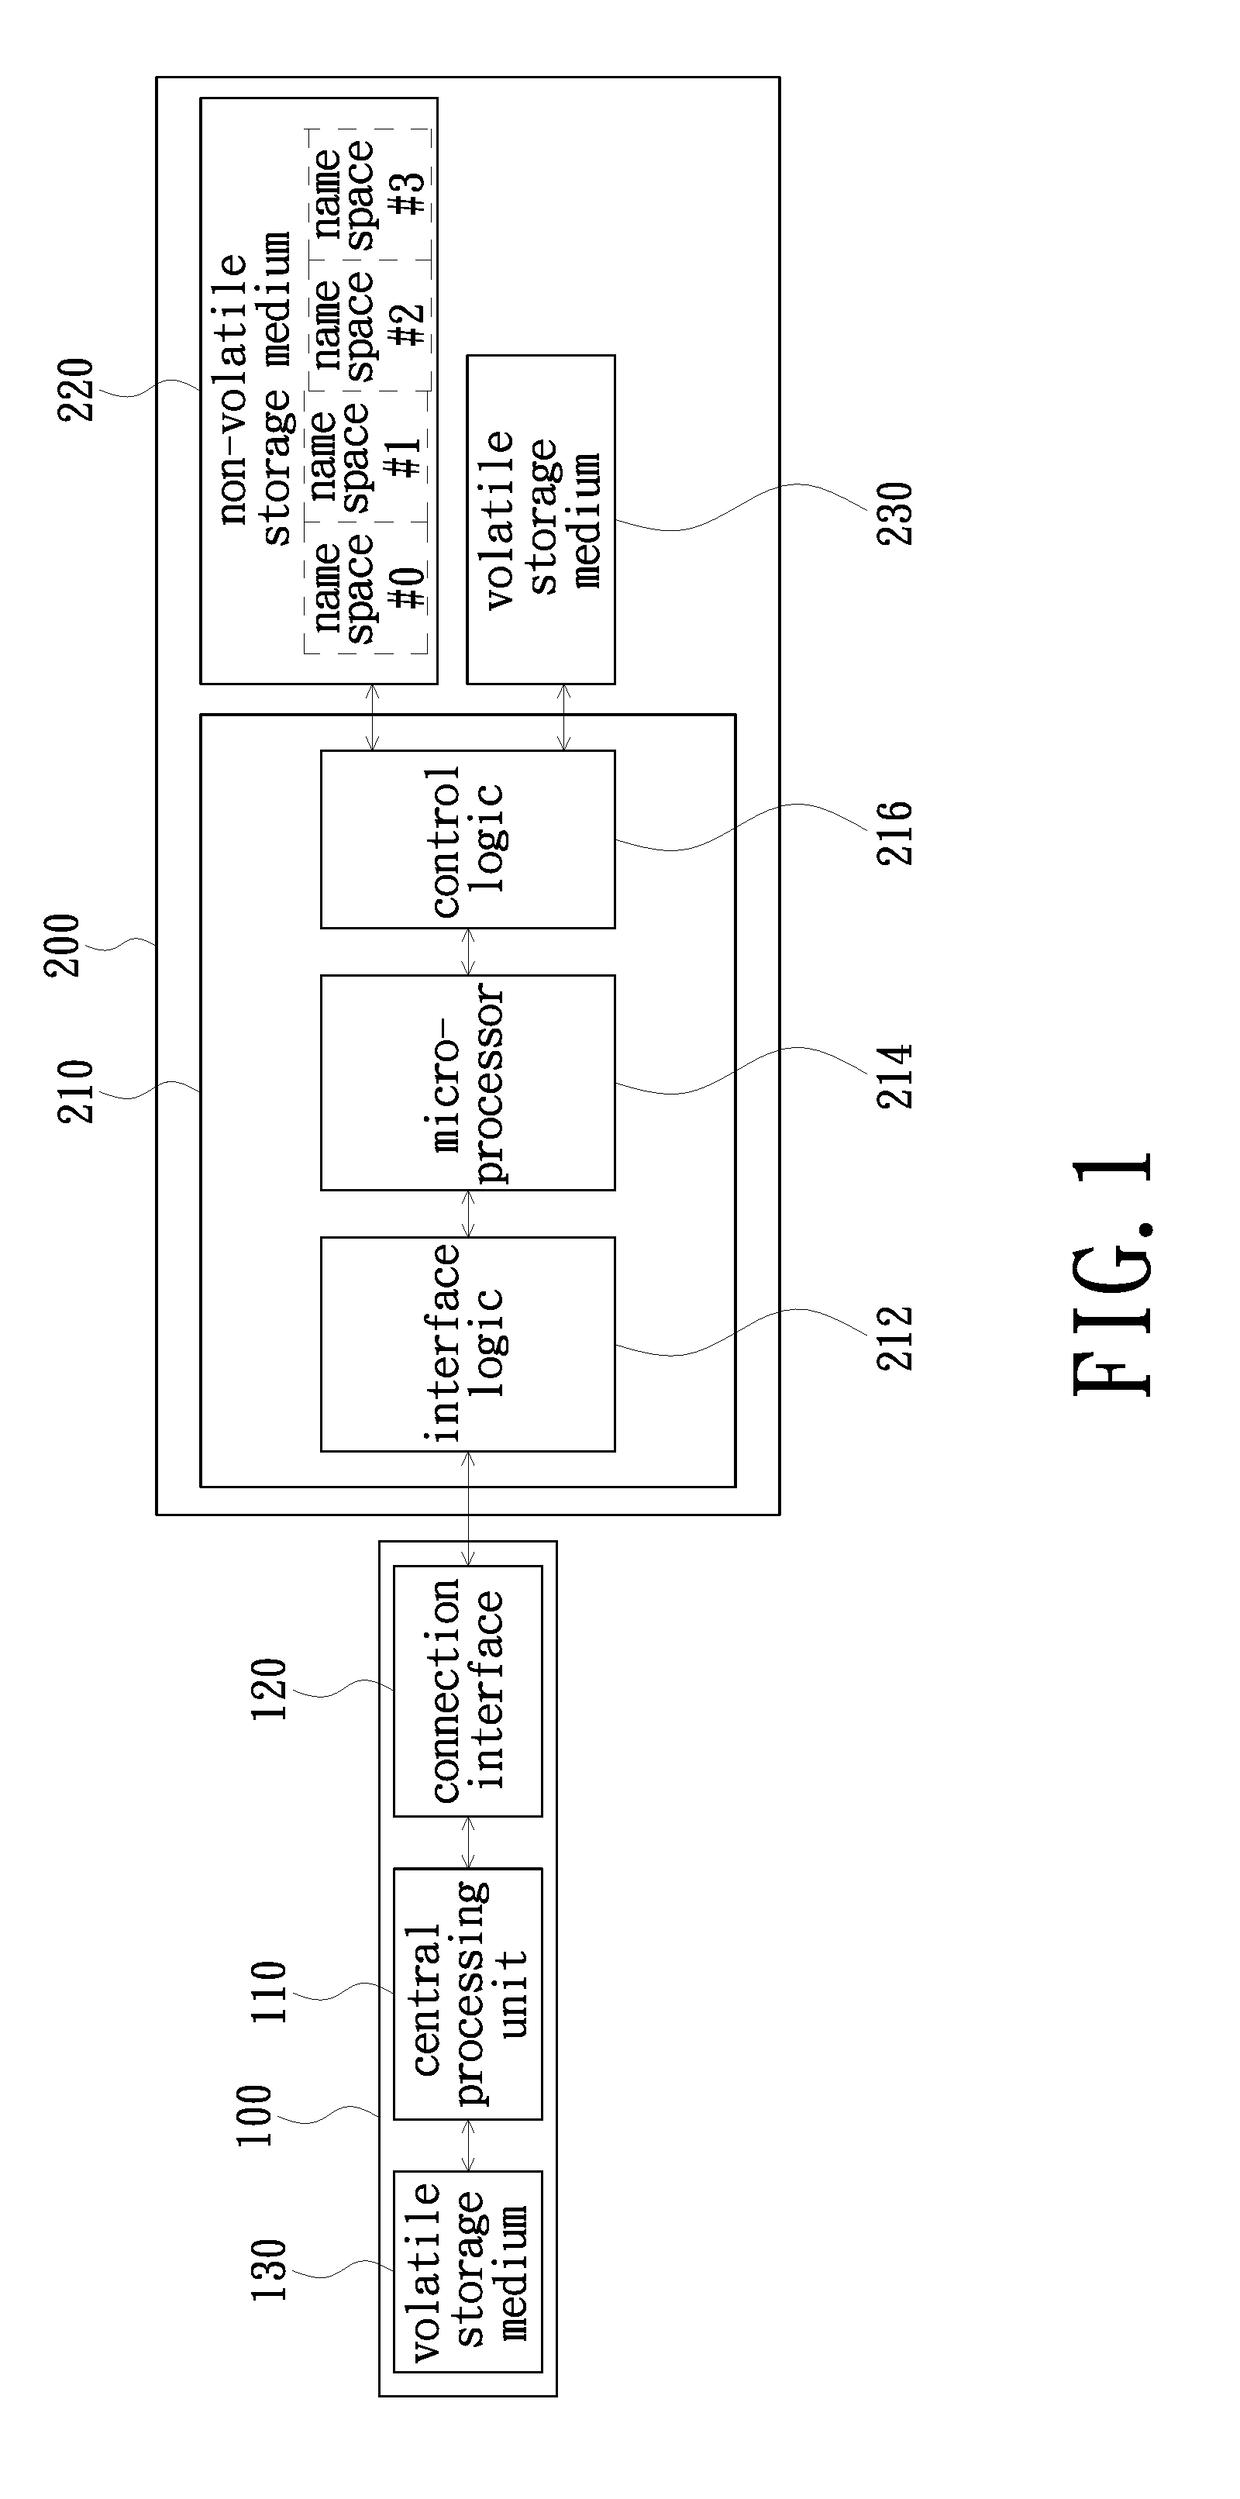 Method for creating multi-namespace and method for accessing data therein